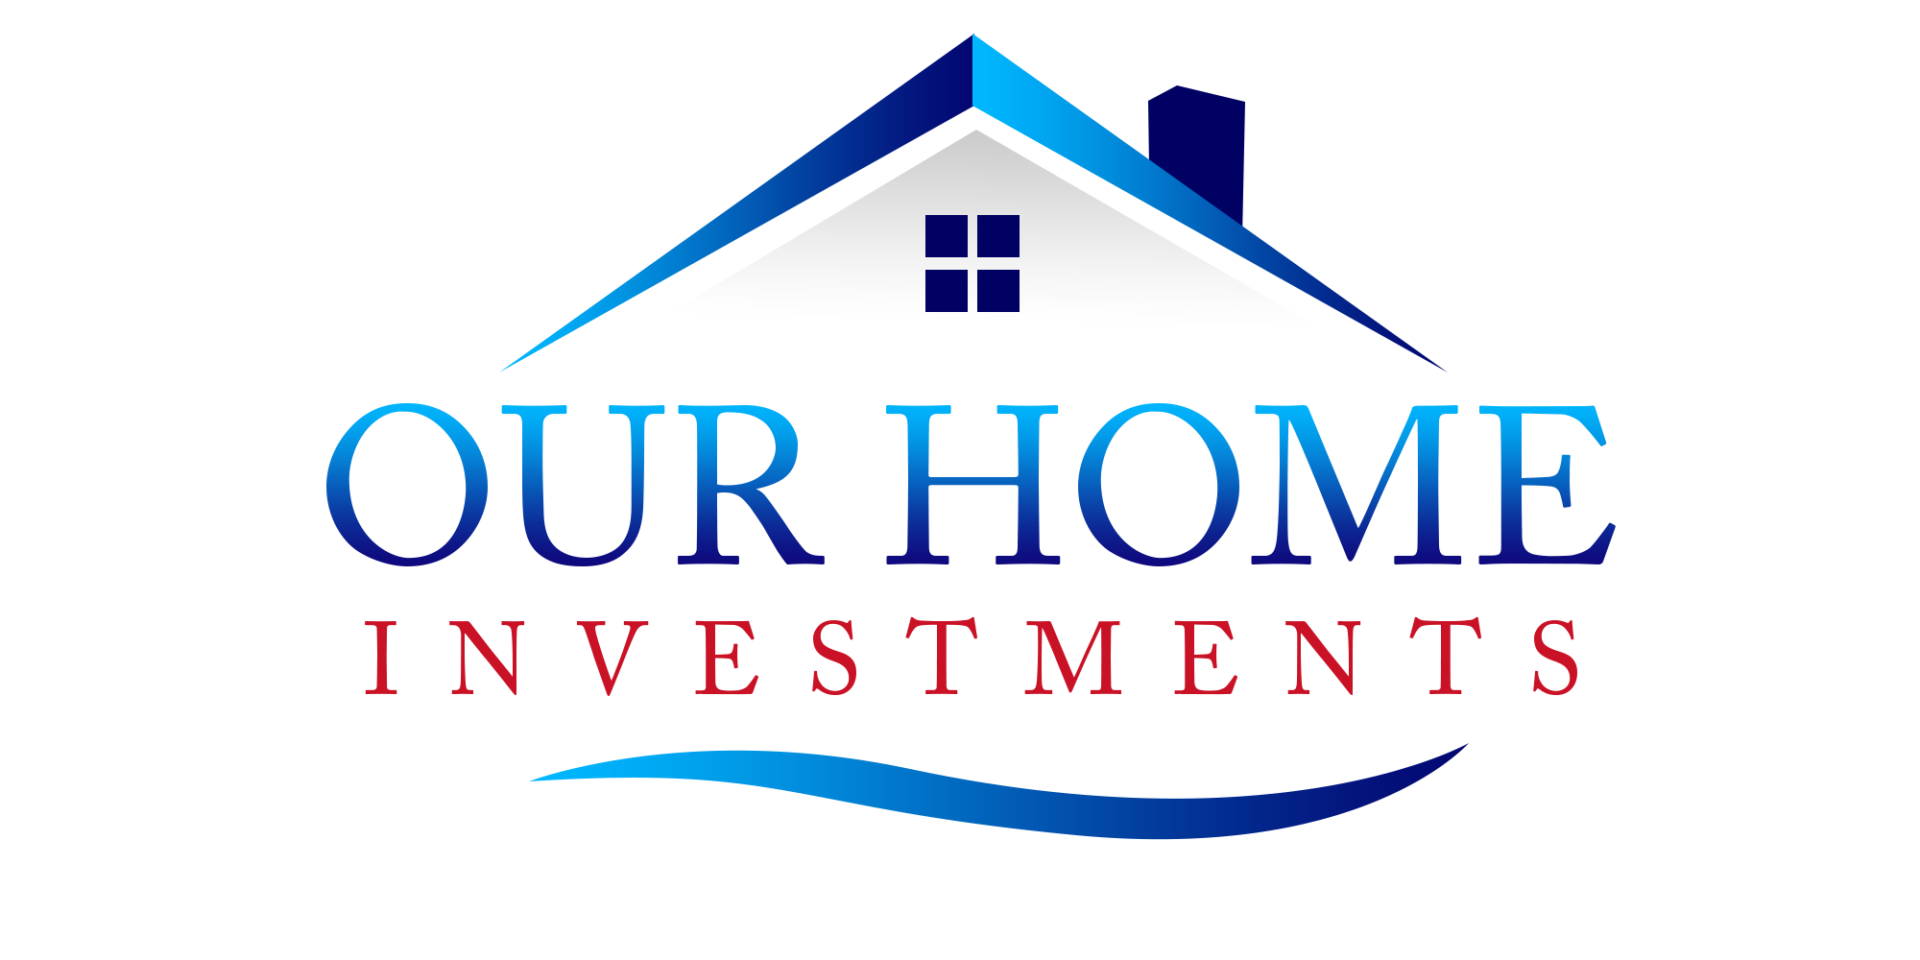 Our Home Investments logo